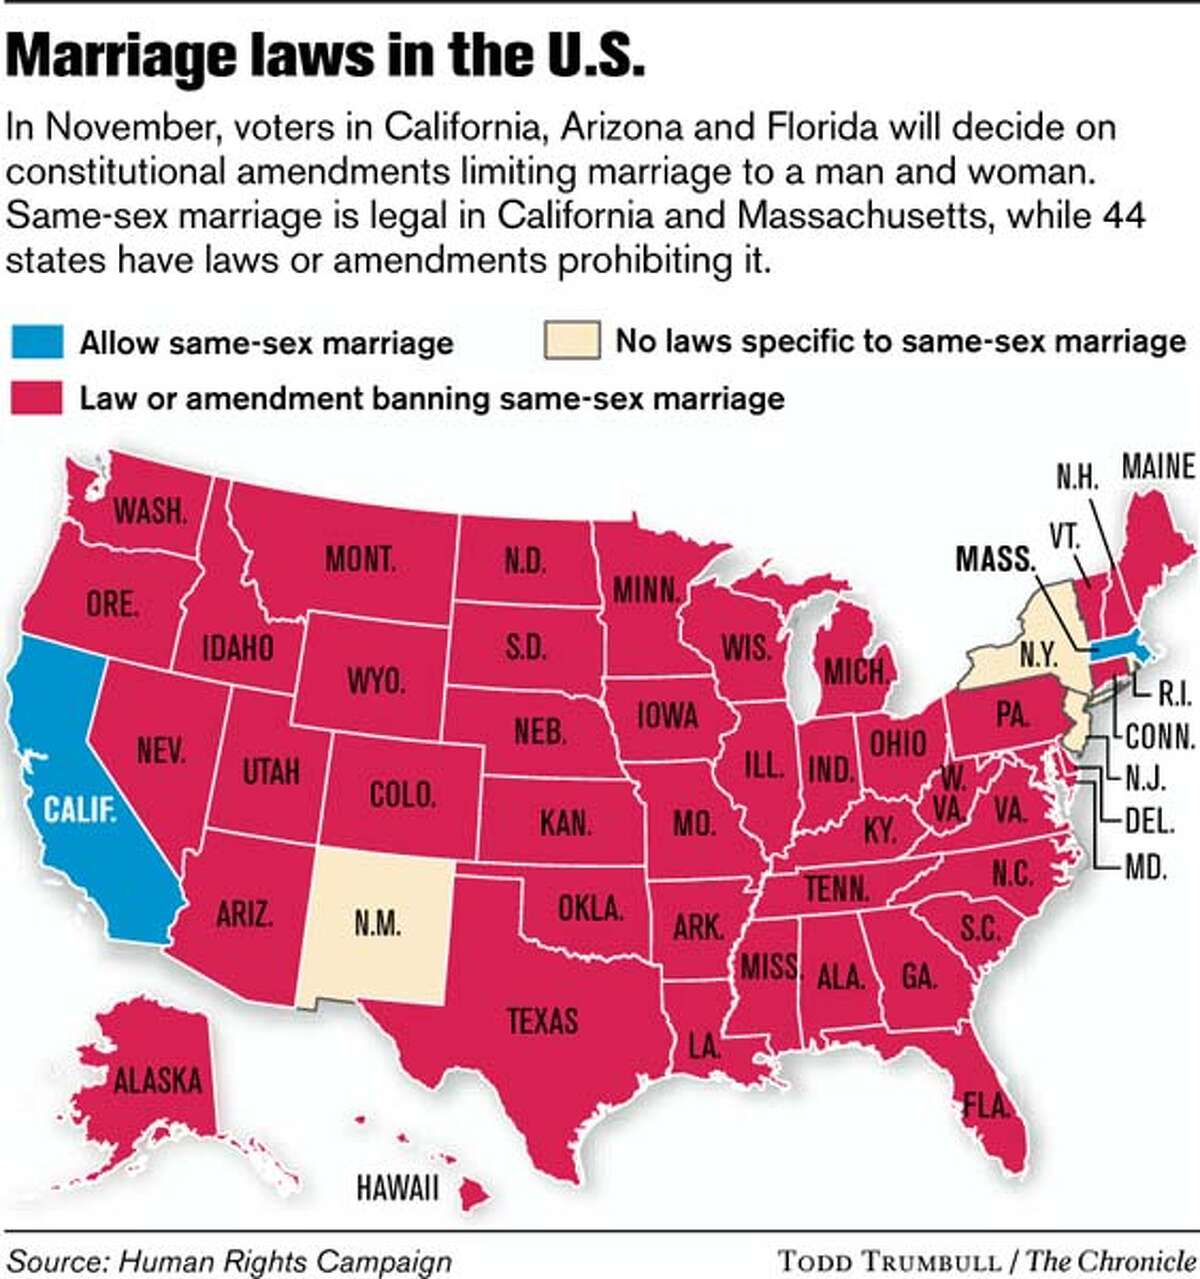 Marriage Laws in the U.S. (Todd Trumbull / The Chronicle)